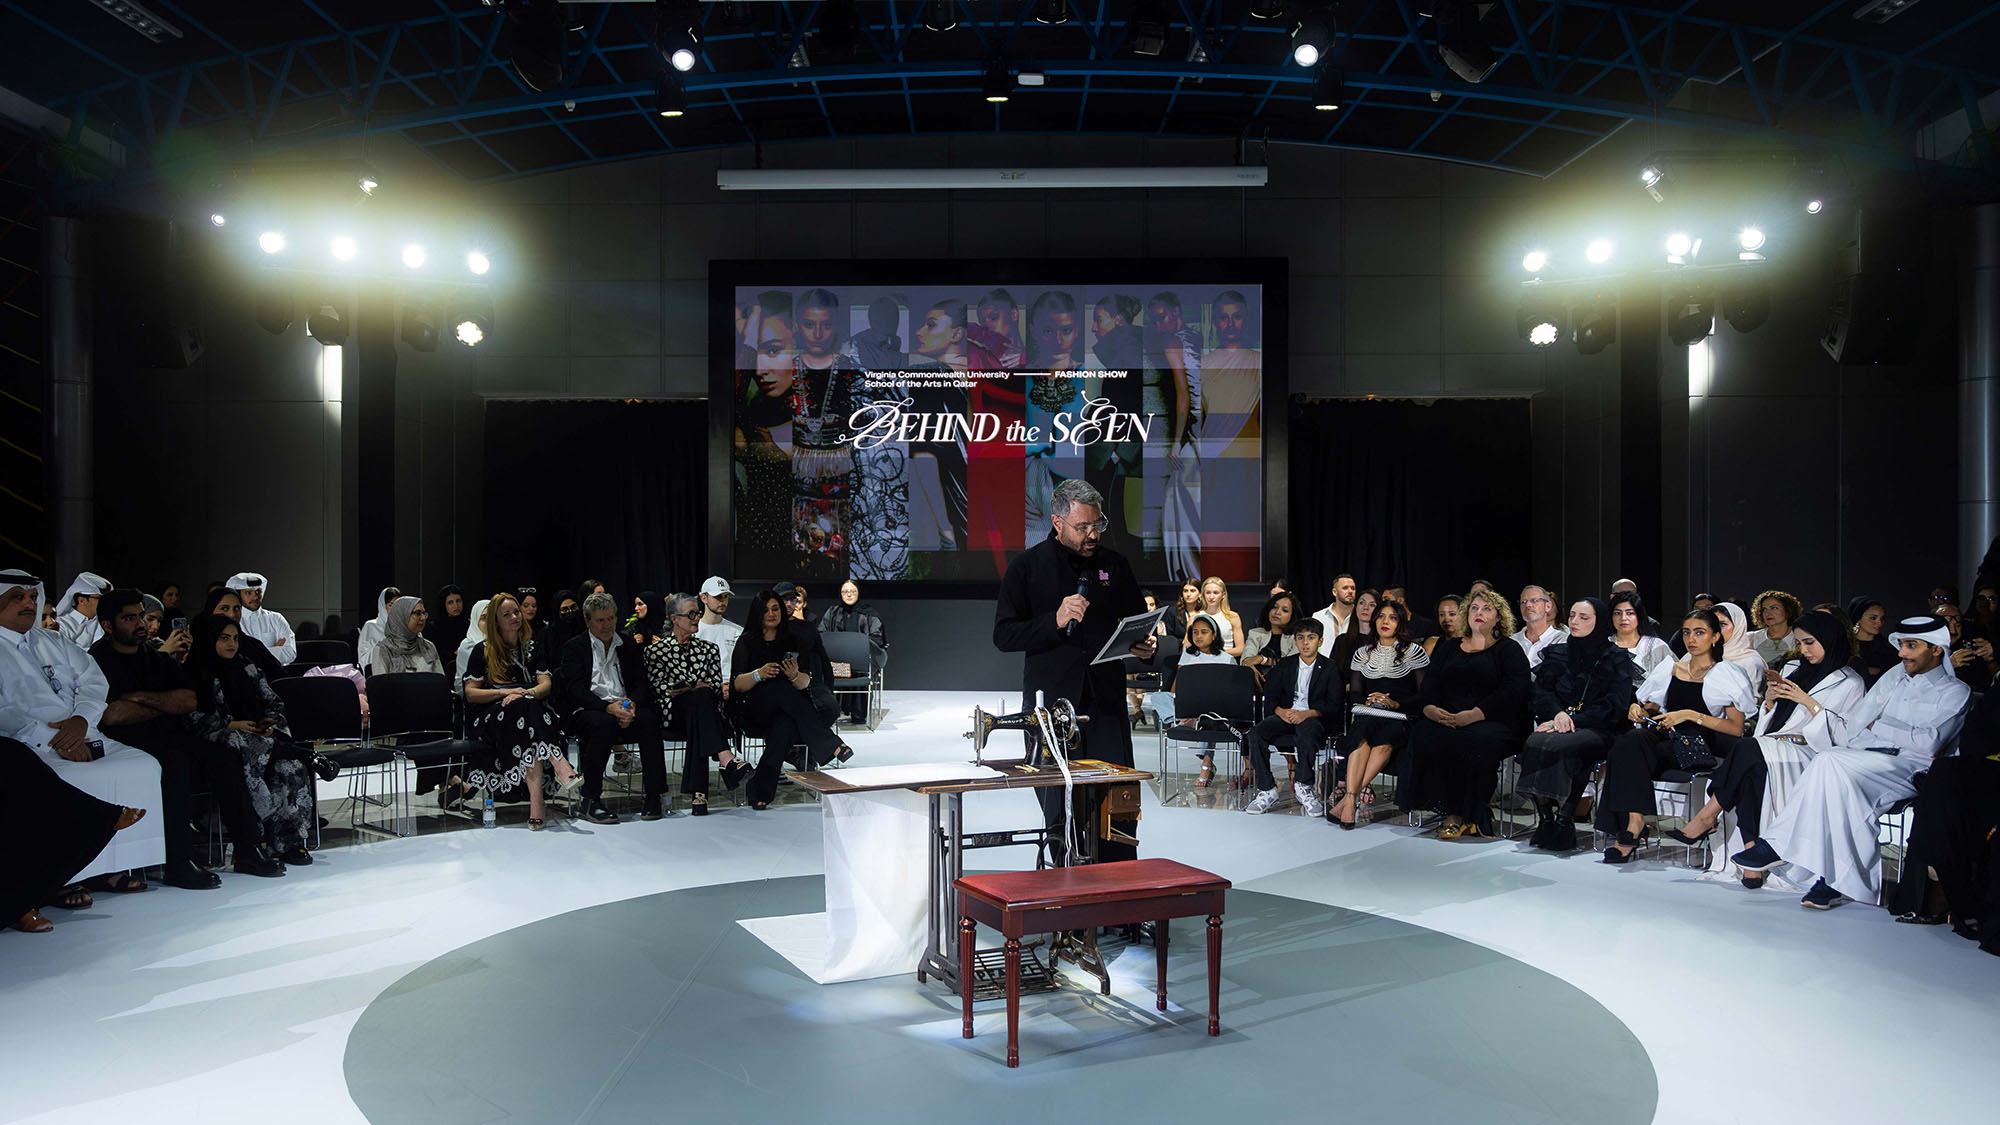 Christopher Fink welcoming everyone to the fashion show . The runway is circular with two concentric rings made up of seats for the audience . In the center of the ring or runway is an old style sewing machine, and a stool , with a length of cloth hanging from it. In the background is a large video screen with the words behind the seen